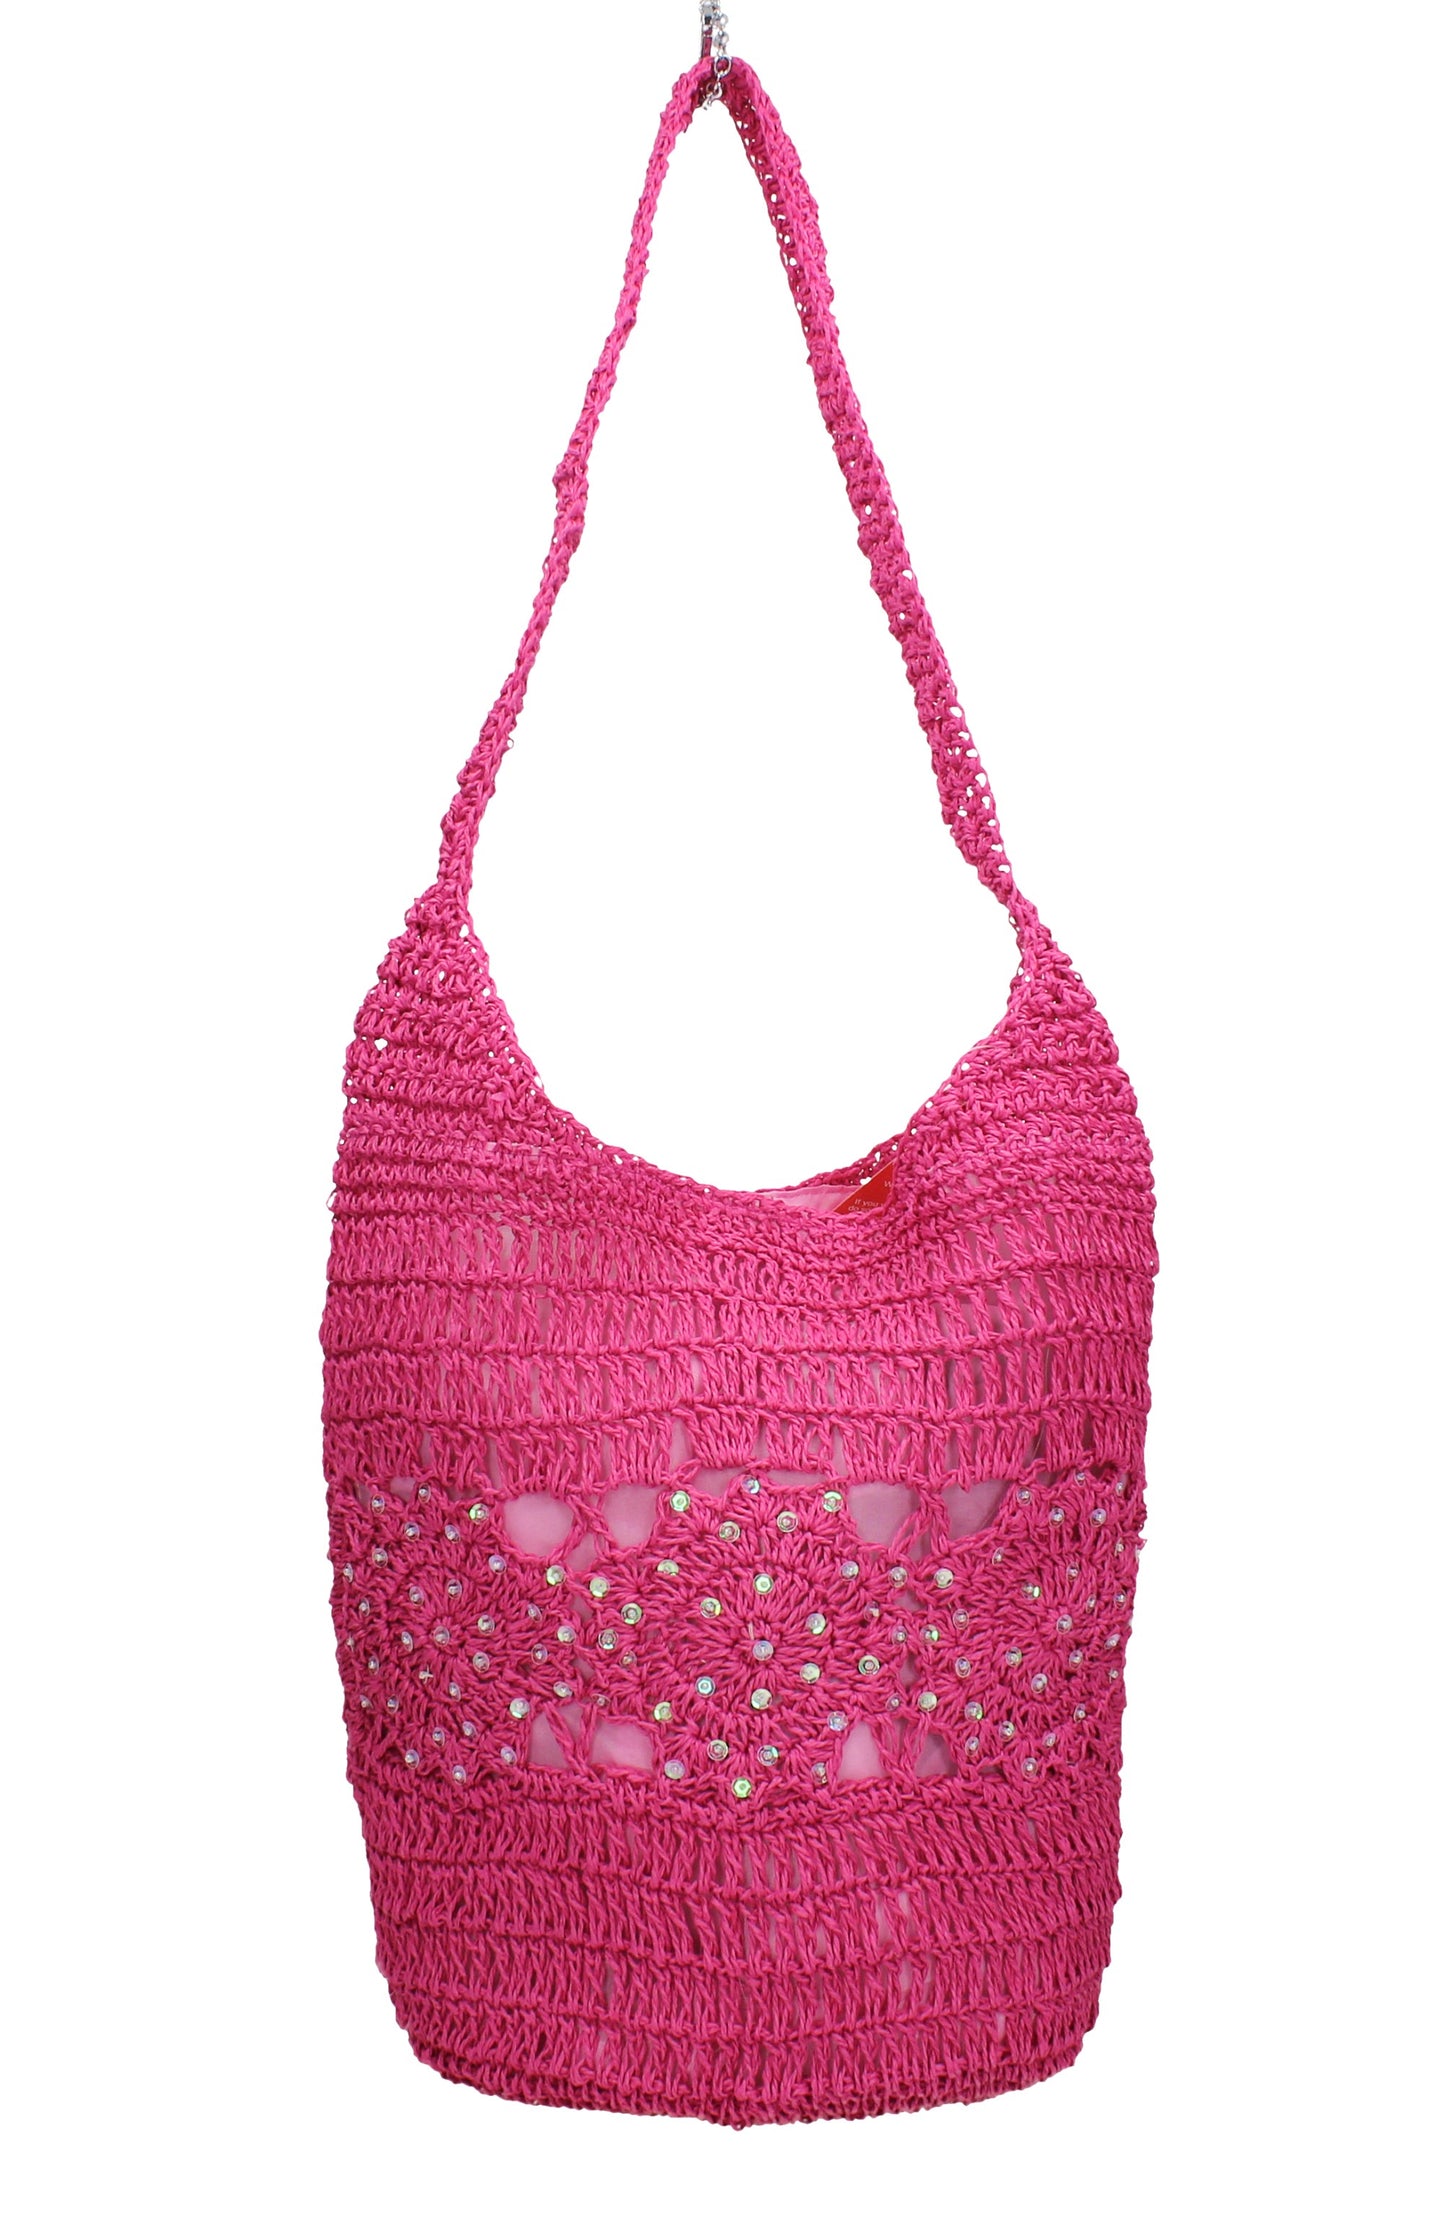 Swanky Swans Soft Bucket Style Pink Beach Tote Bag Summer HandbagPerfect for School, Weddings, Day out!